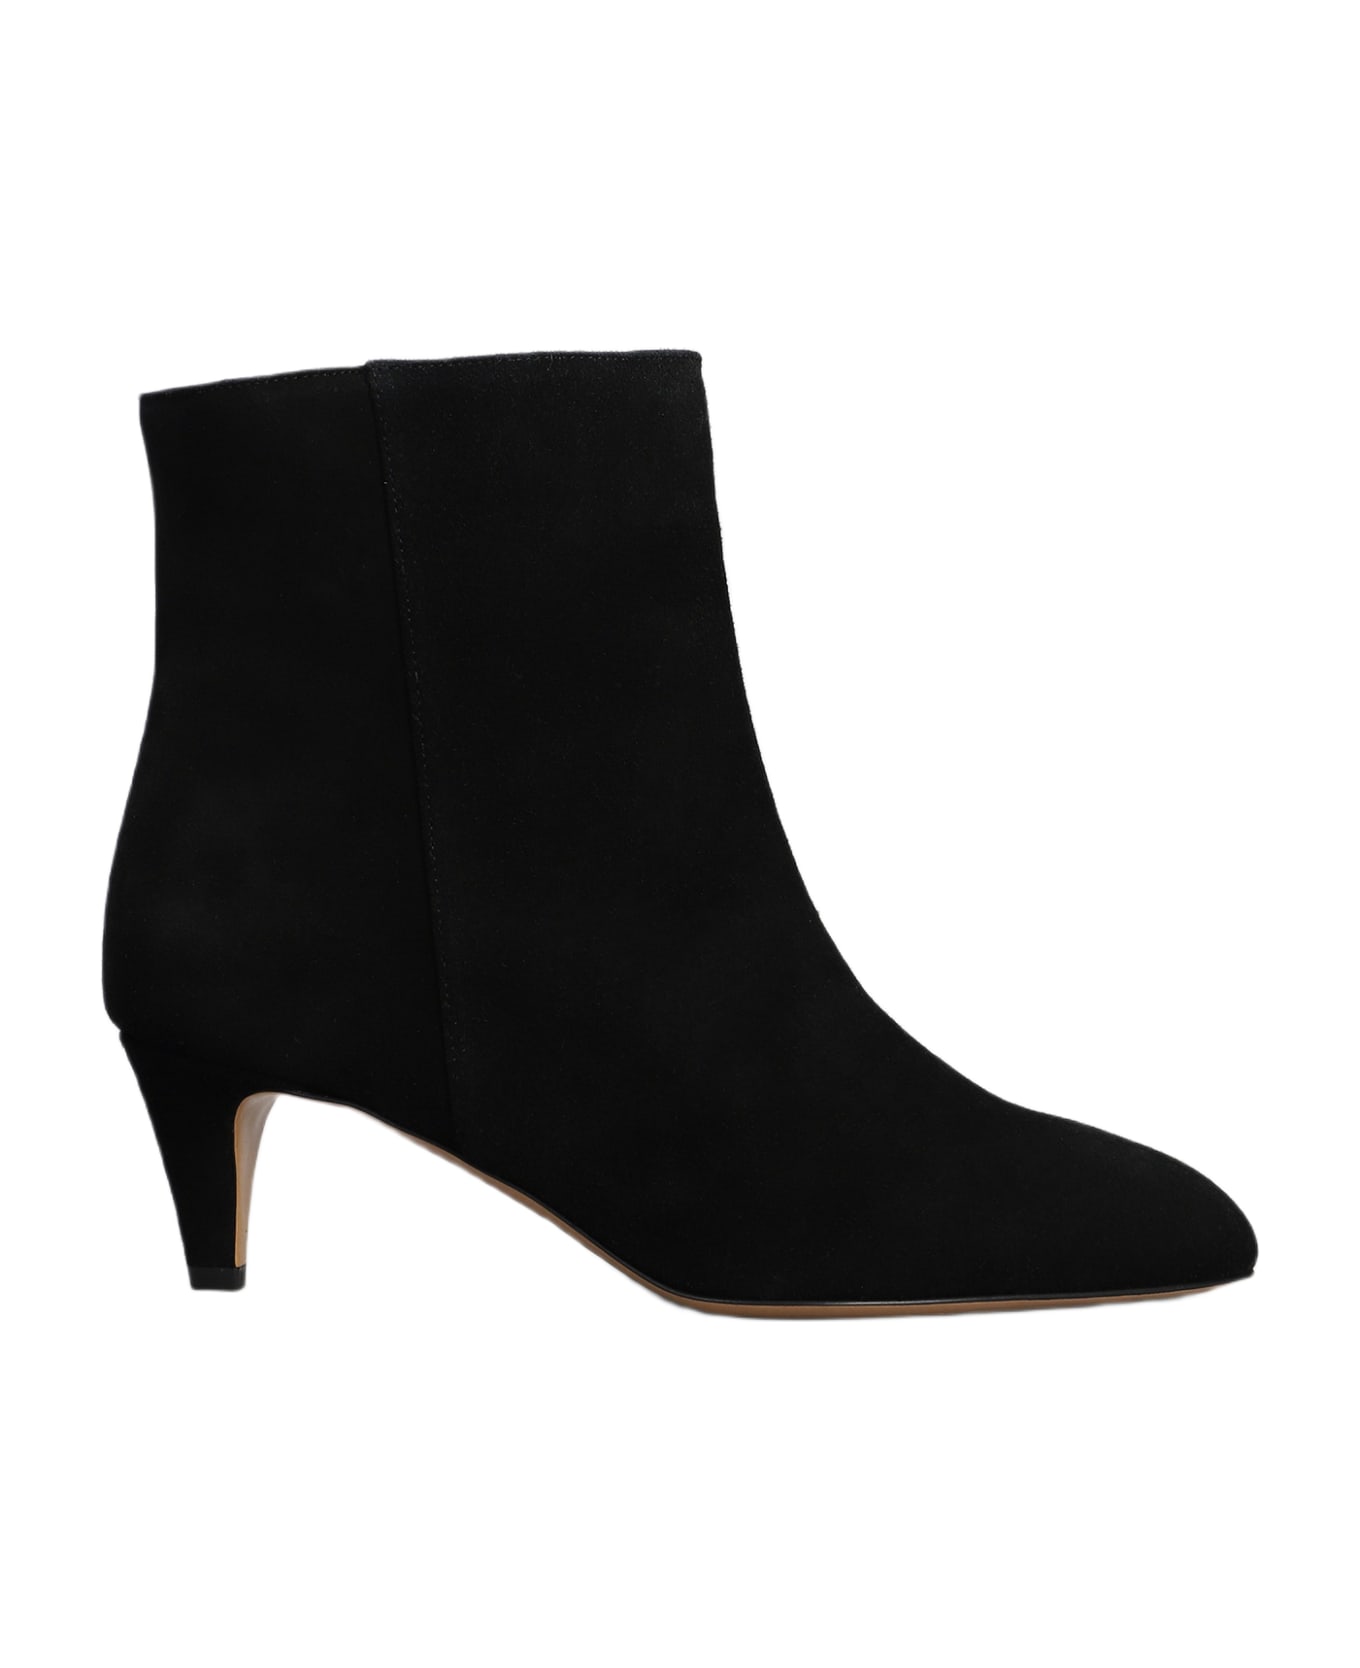 Isabel Marant Daxi Low Heels Ankle Boots In Black Suede - black